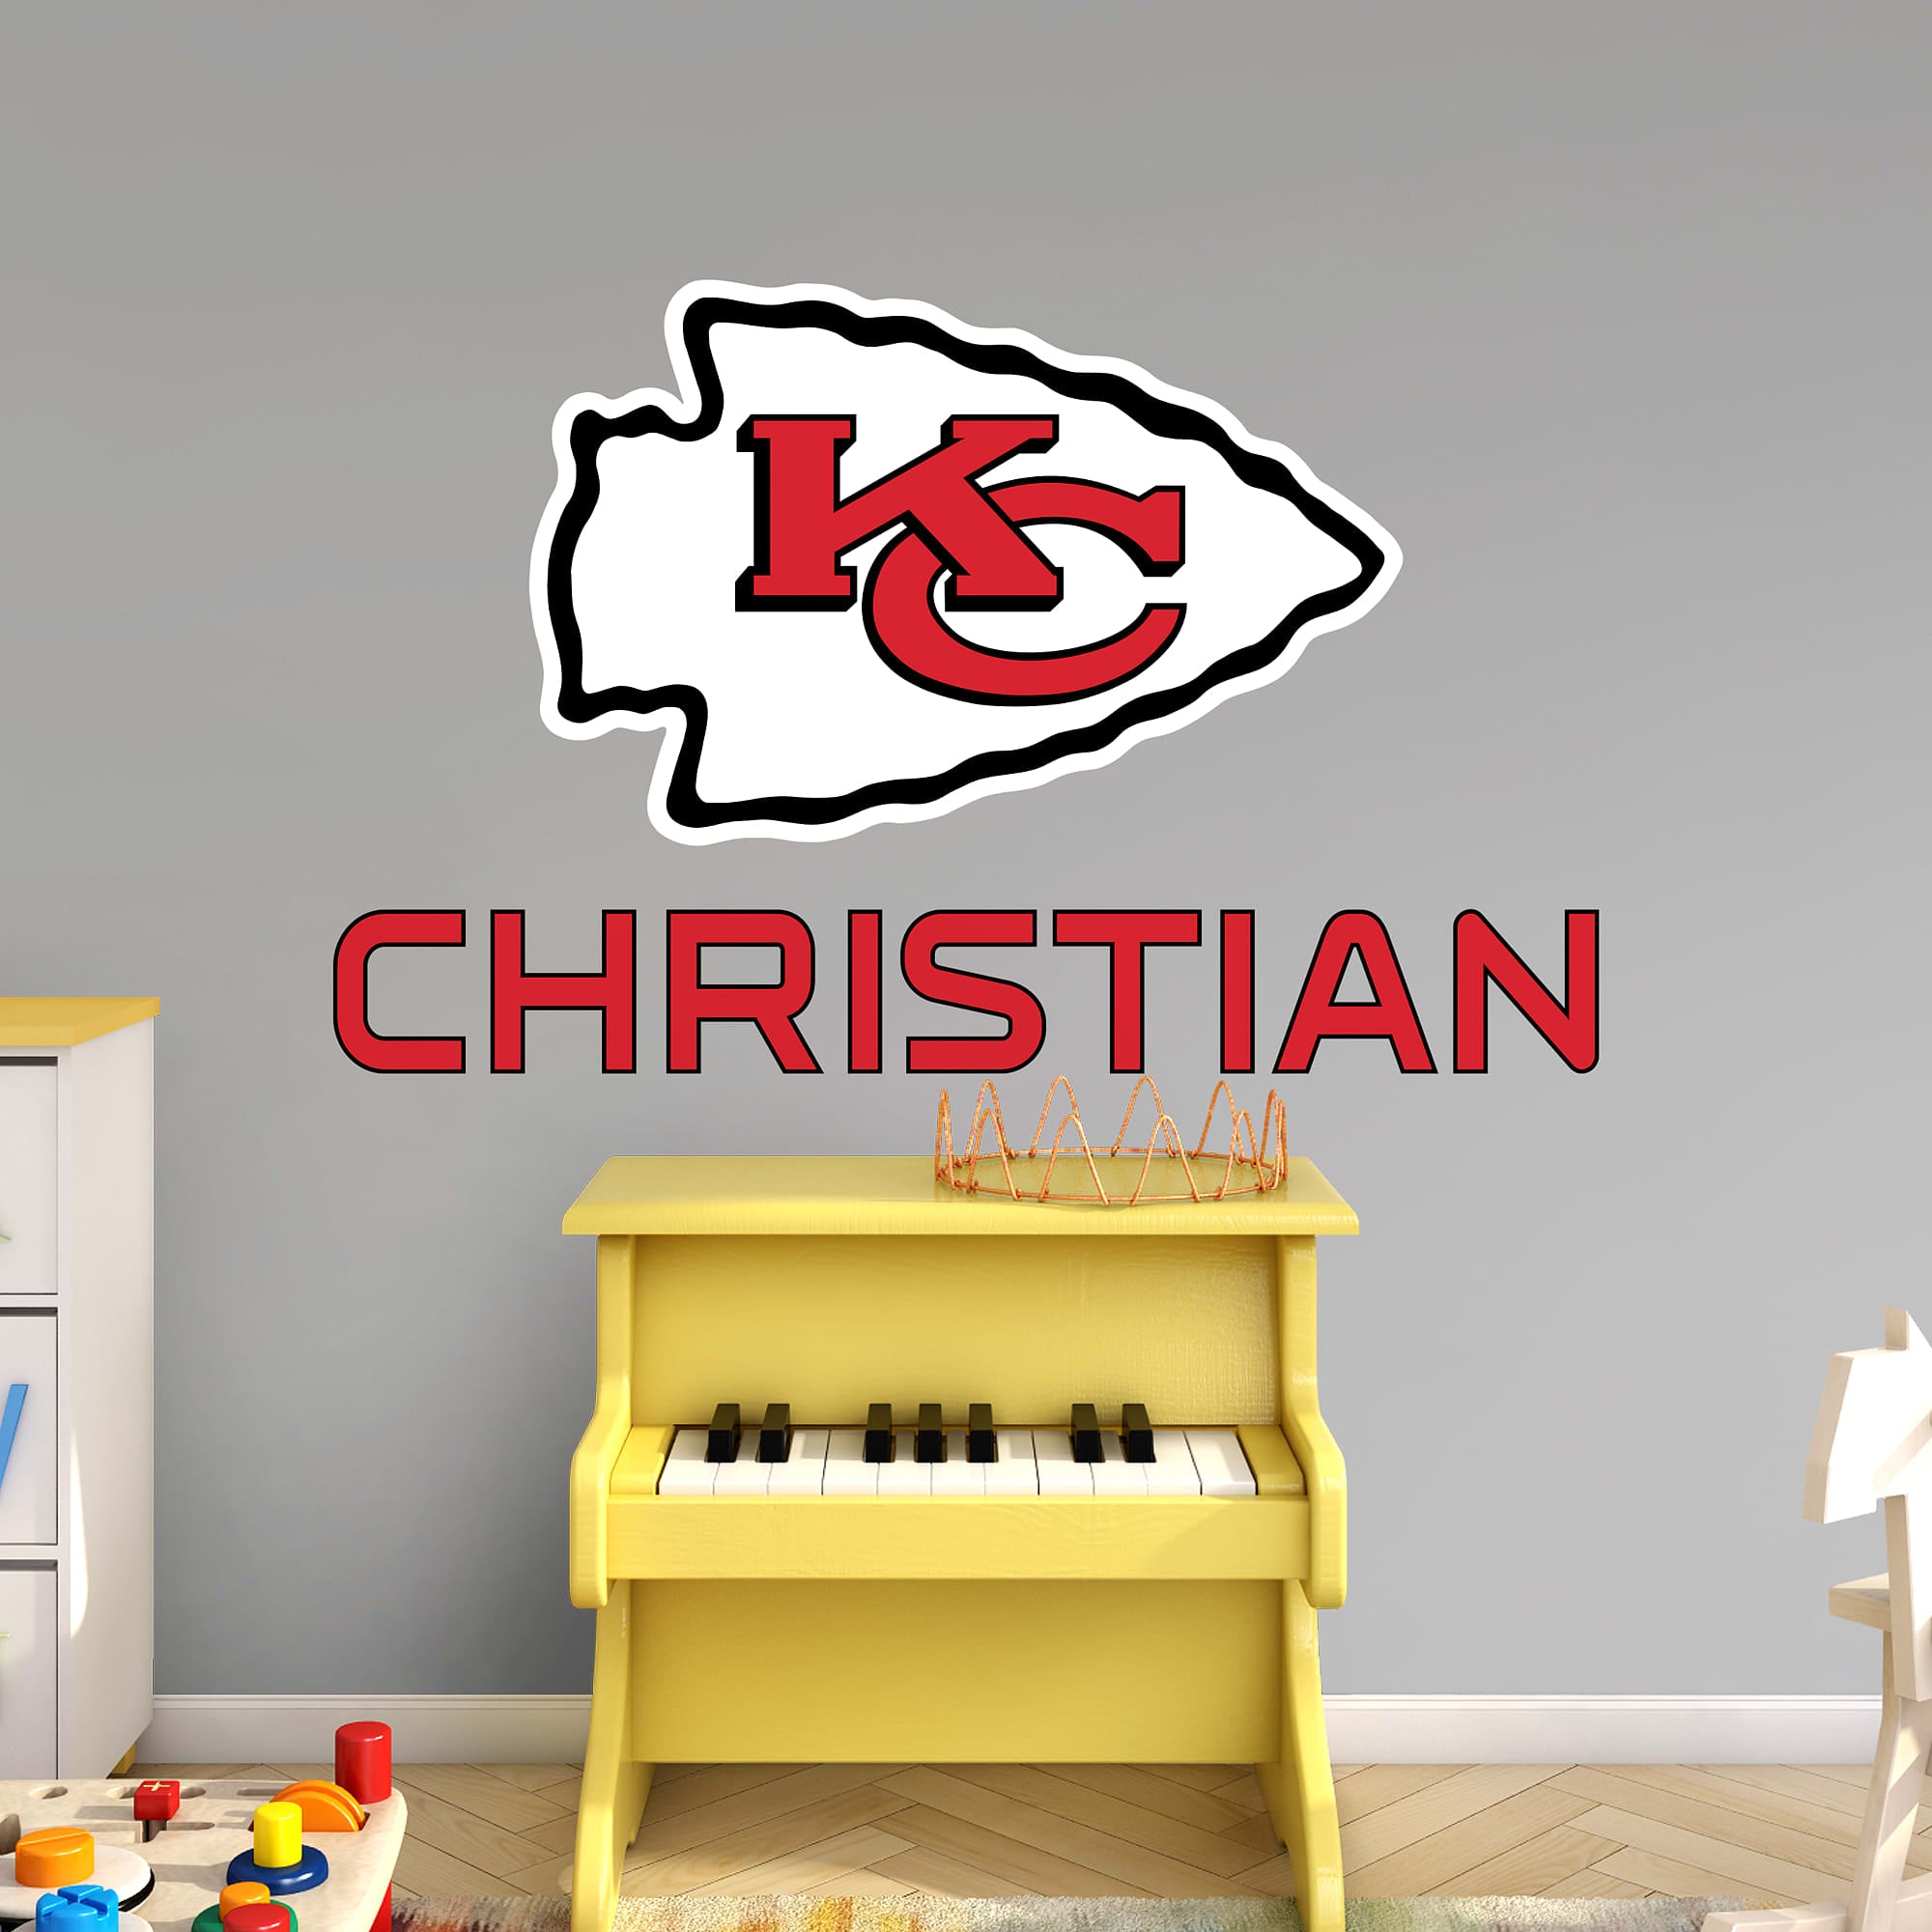 Kansas City Chiefs: Stacked Personalized Name - Officially Licensed NFL Transfer Decal in Red (52"W x 39.5"H) by Fathead | Vinyl